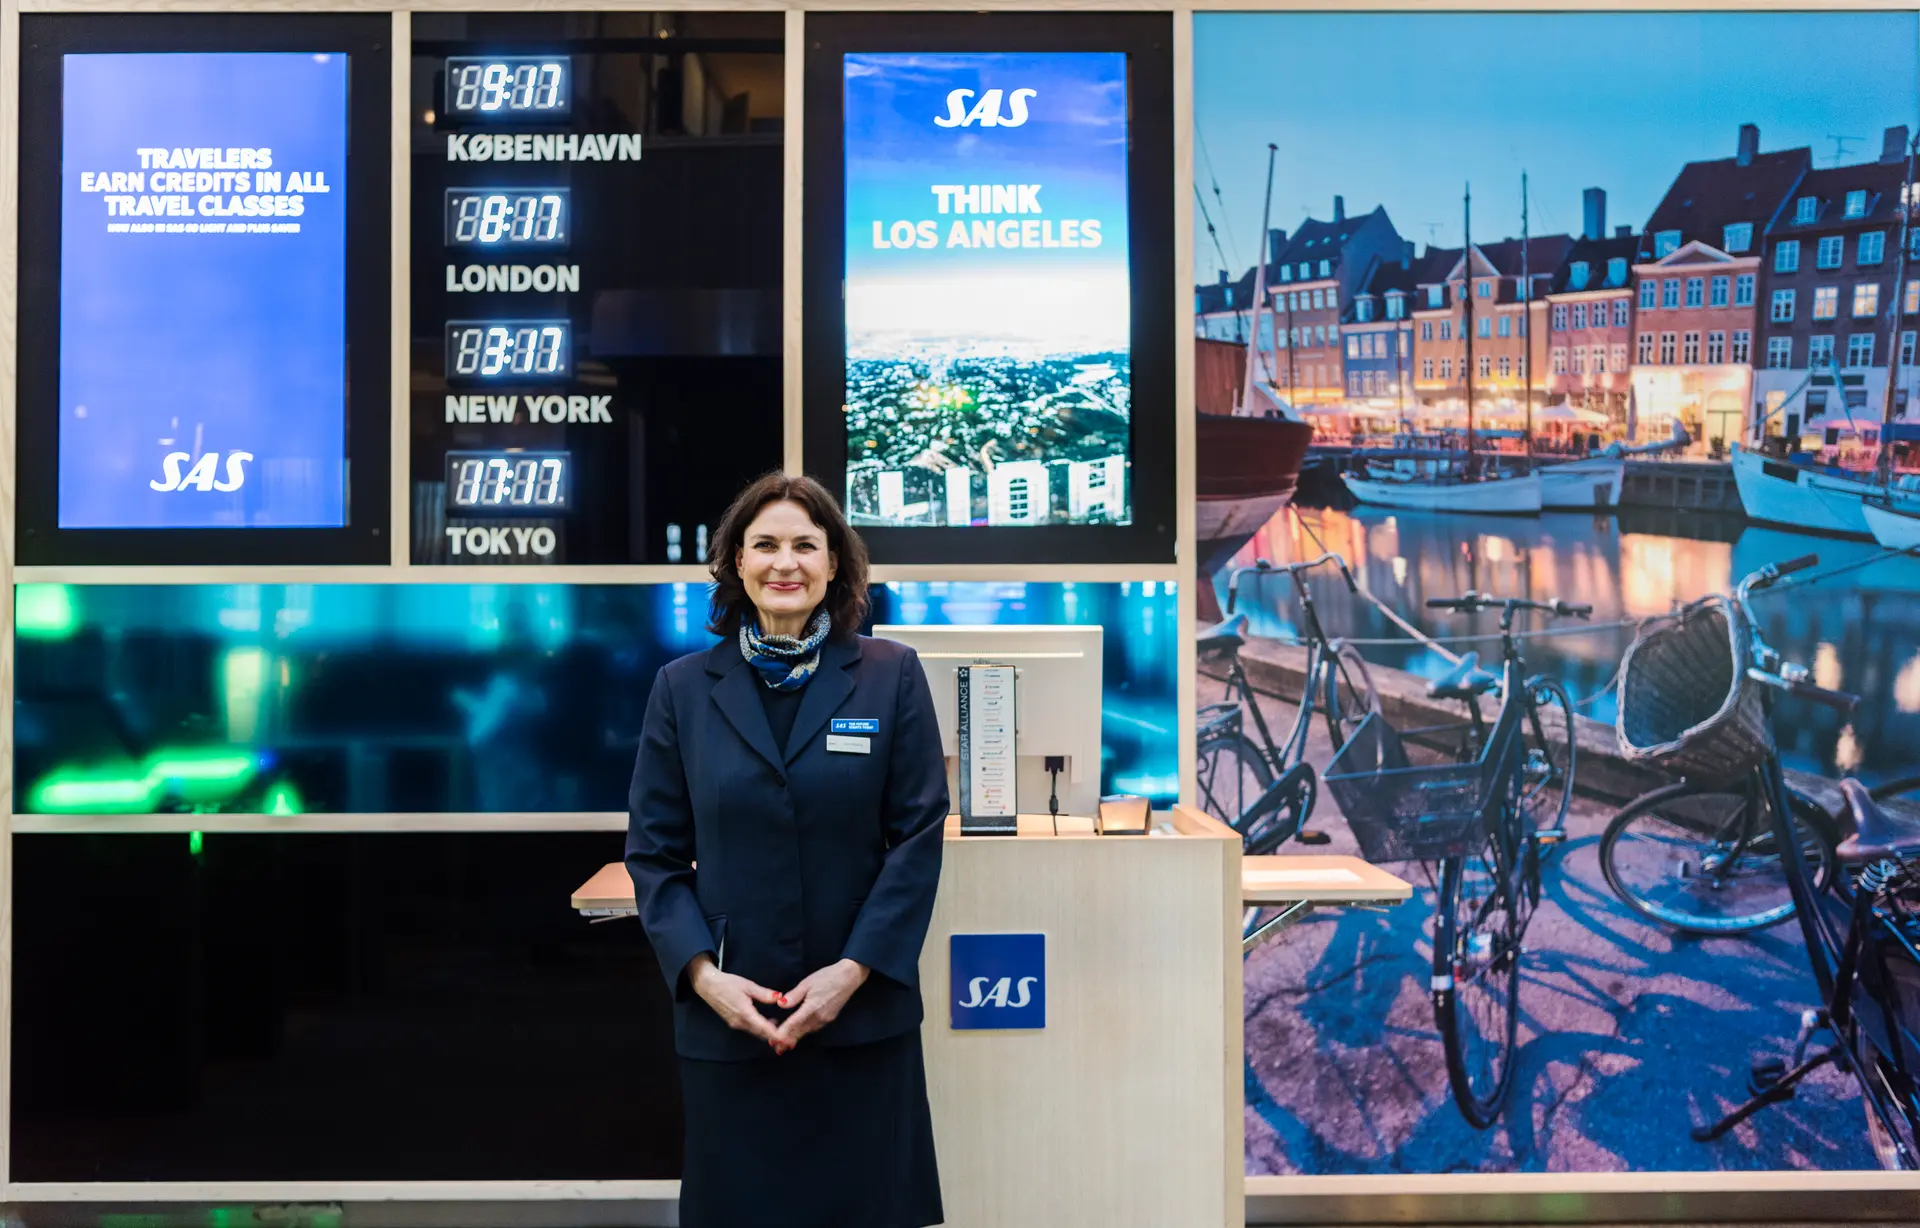 Airline review Airport experience - SAS - 4